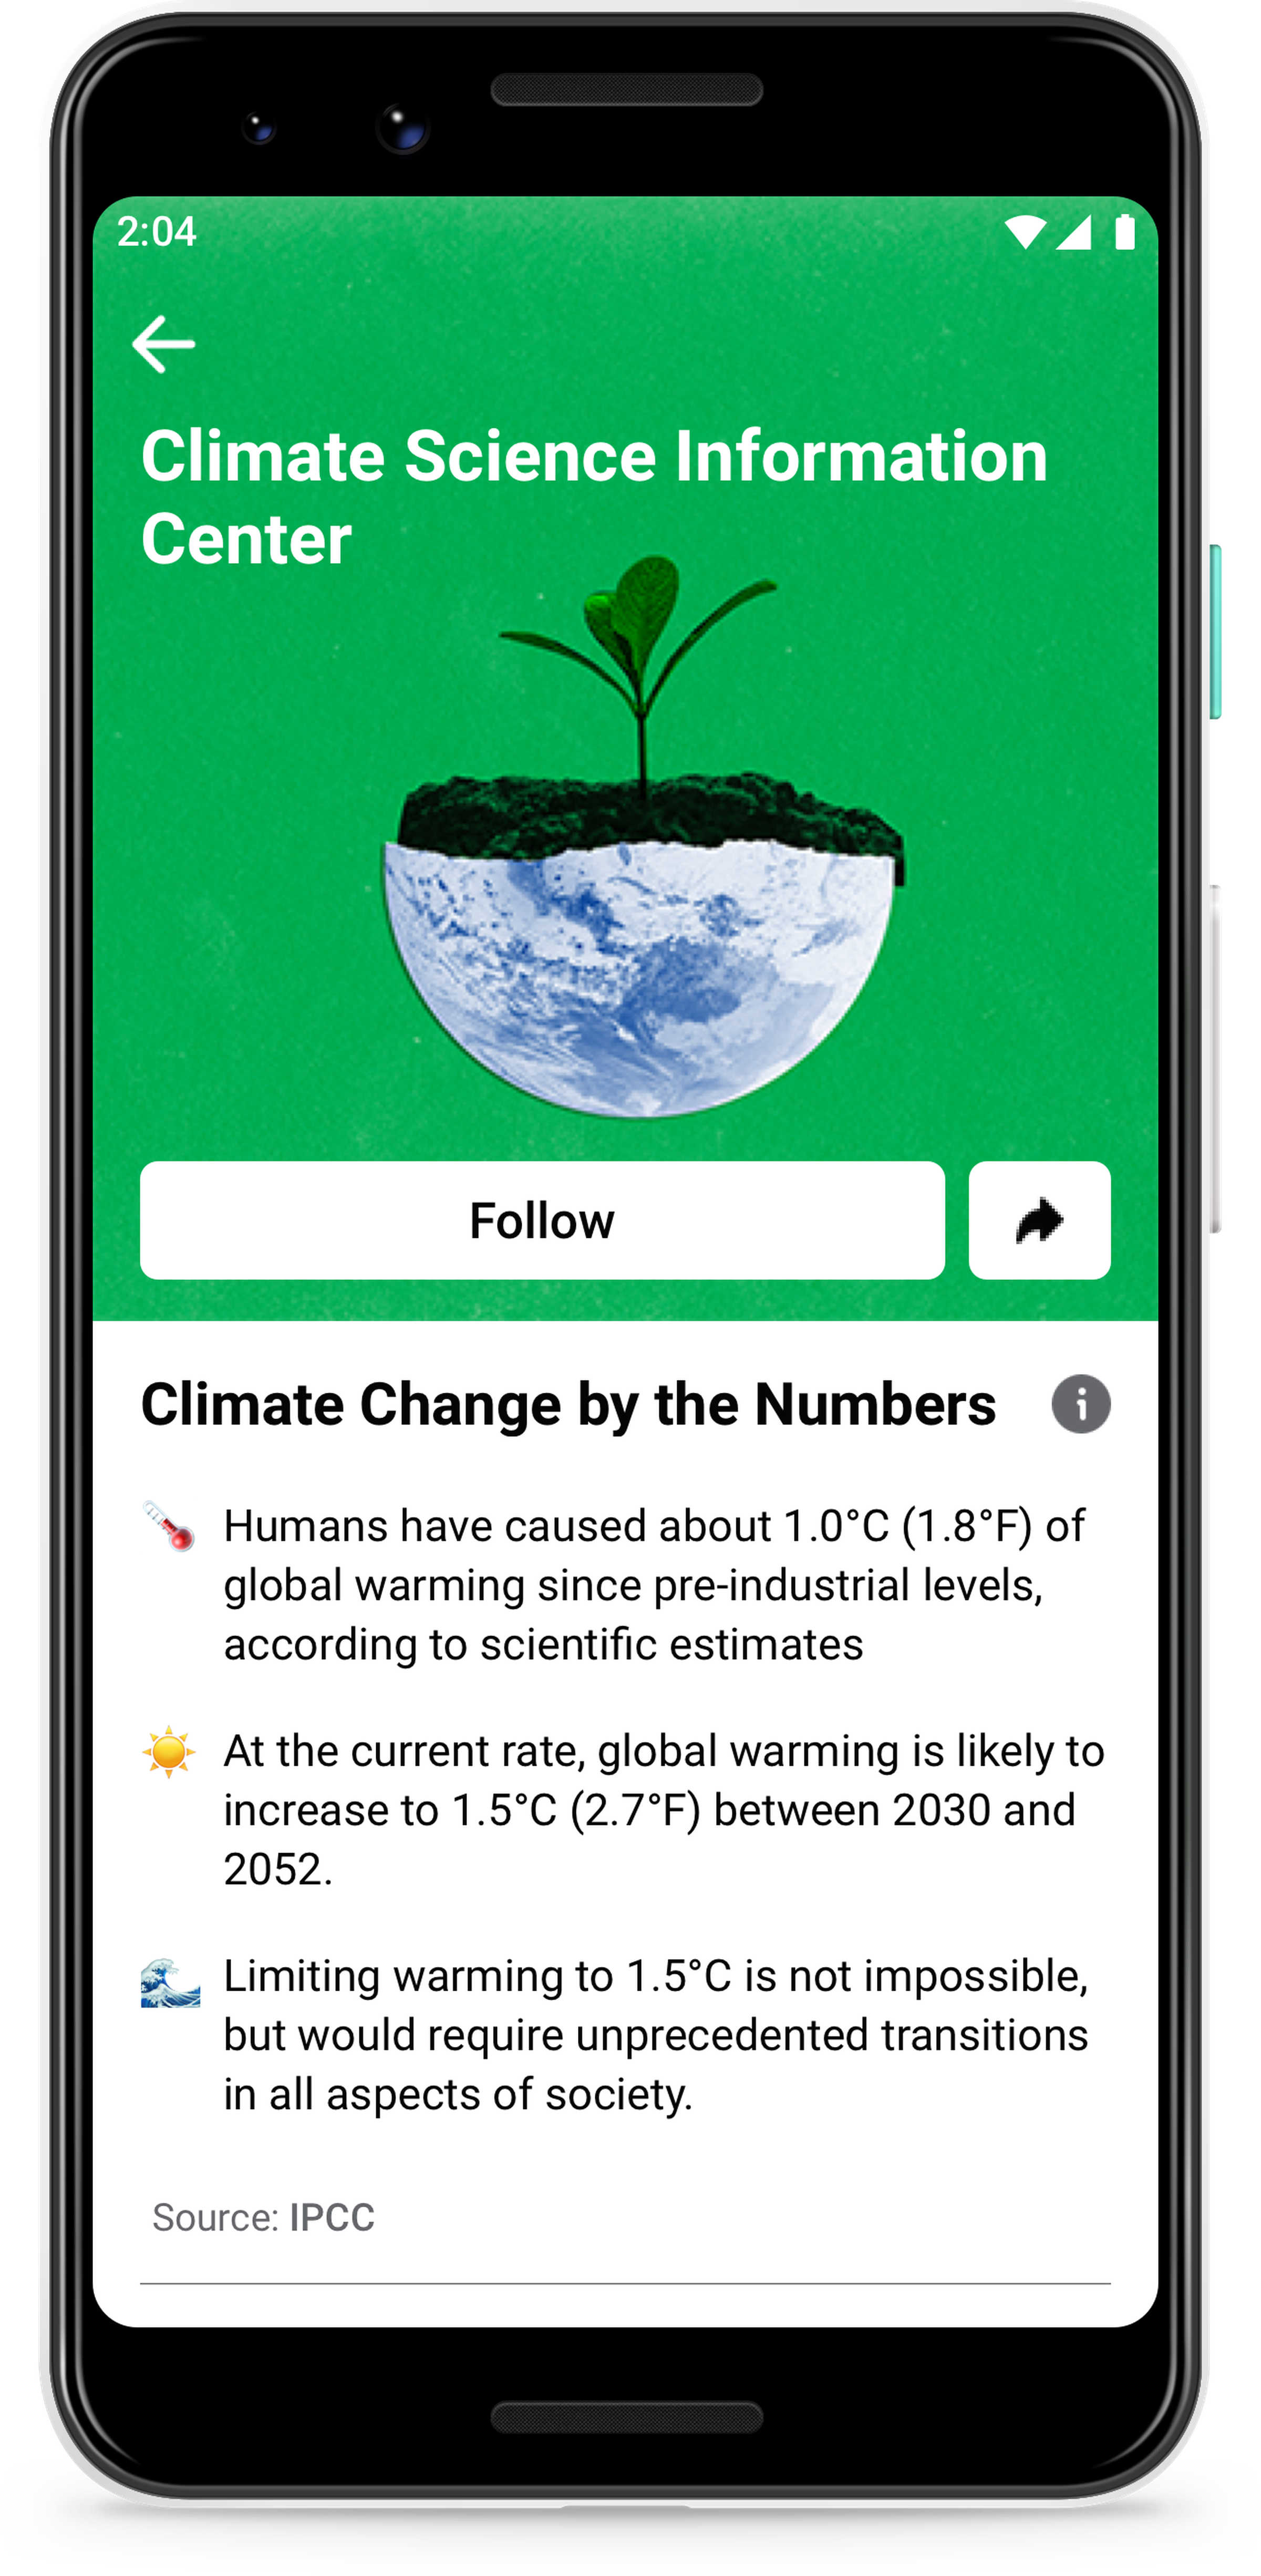 Facebook launched its “Climate Science Information Center” in the US, Germany, the UK, and France 